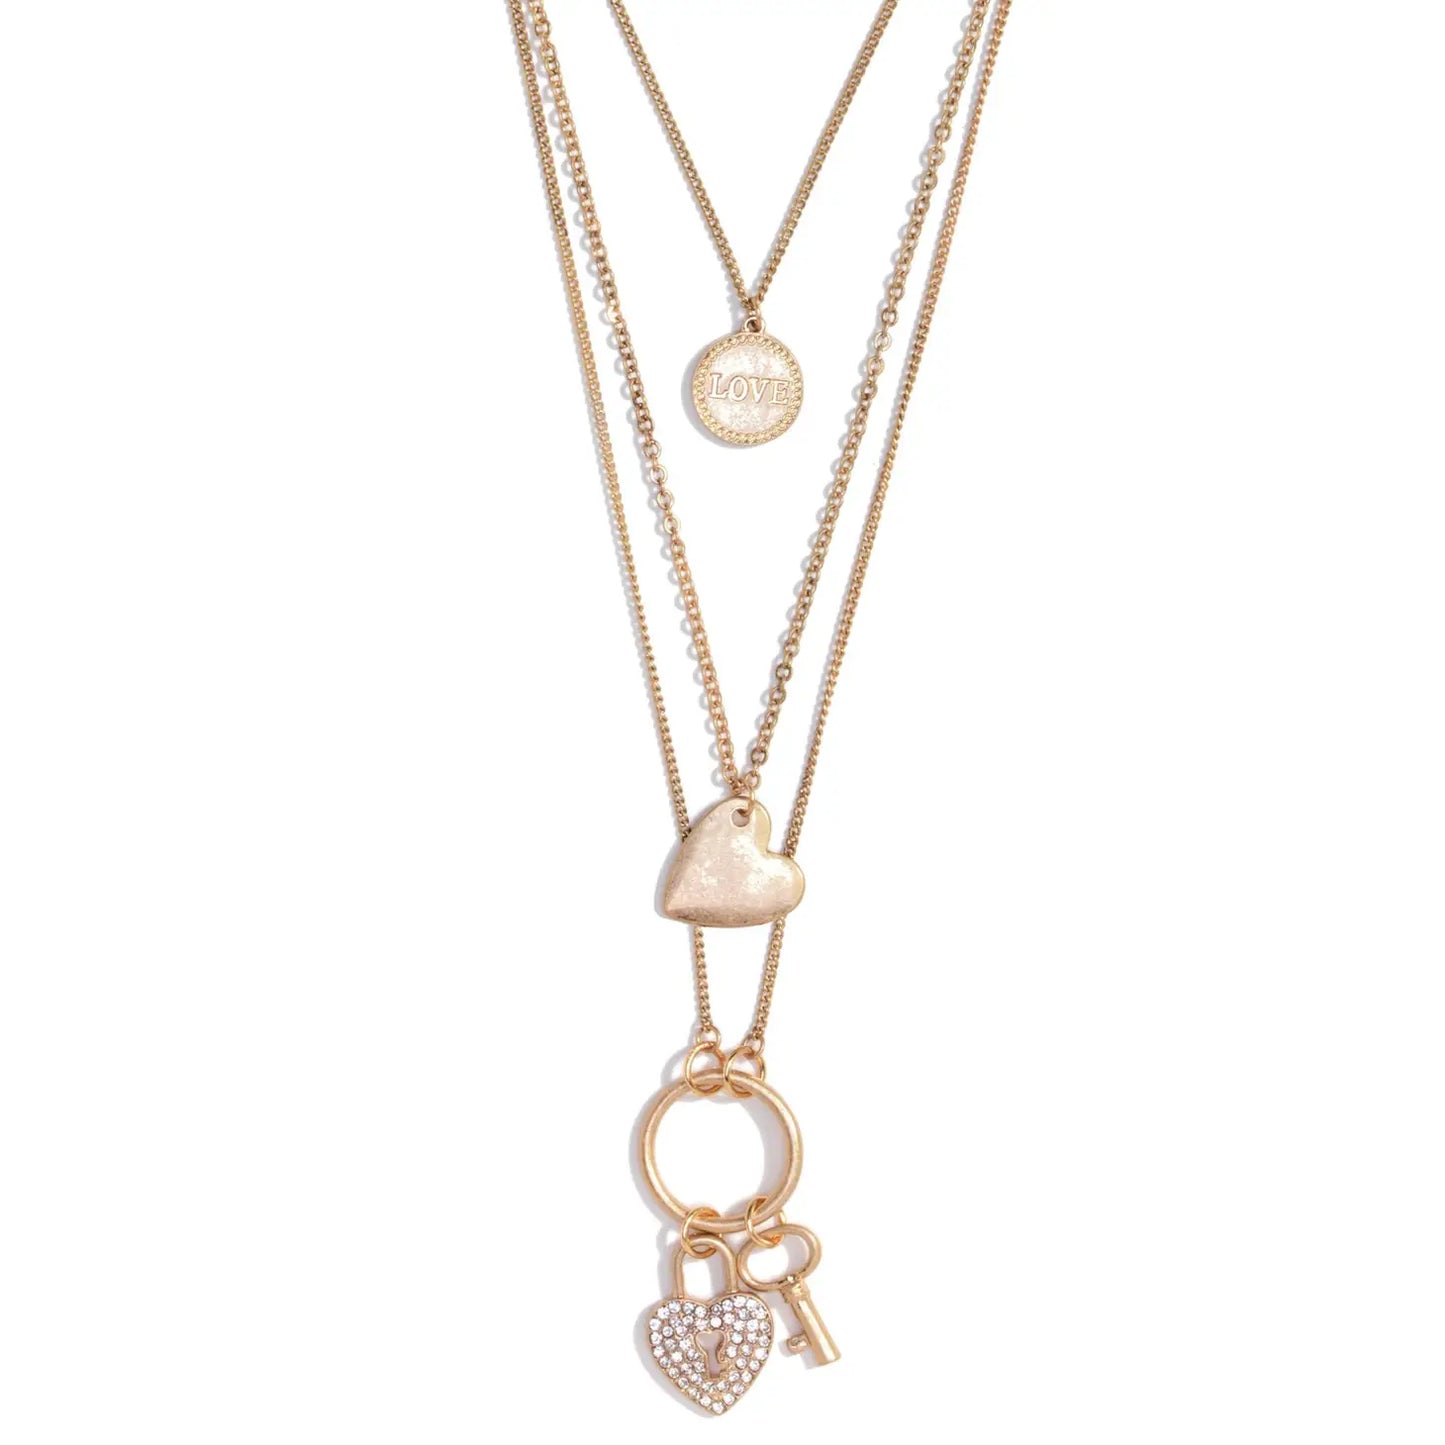 Triple Layer Love Necklace - Gold